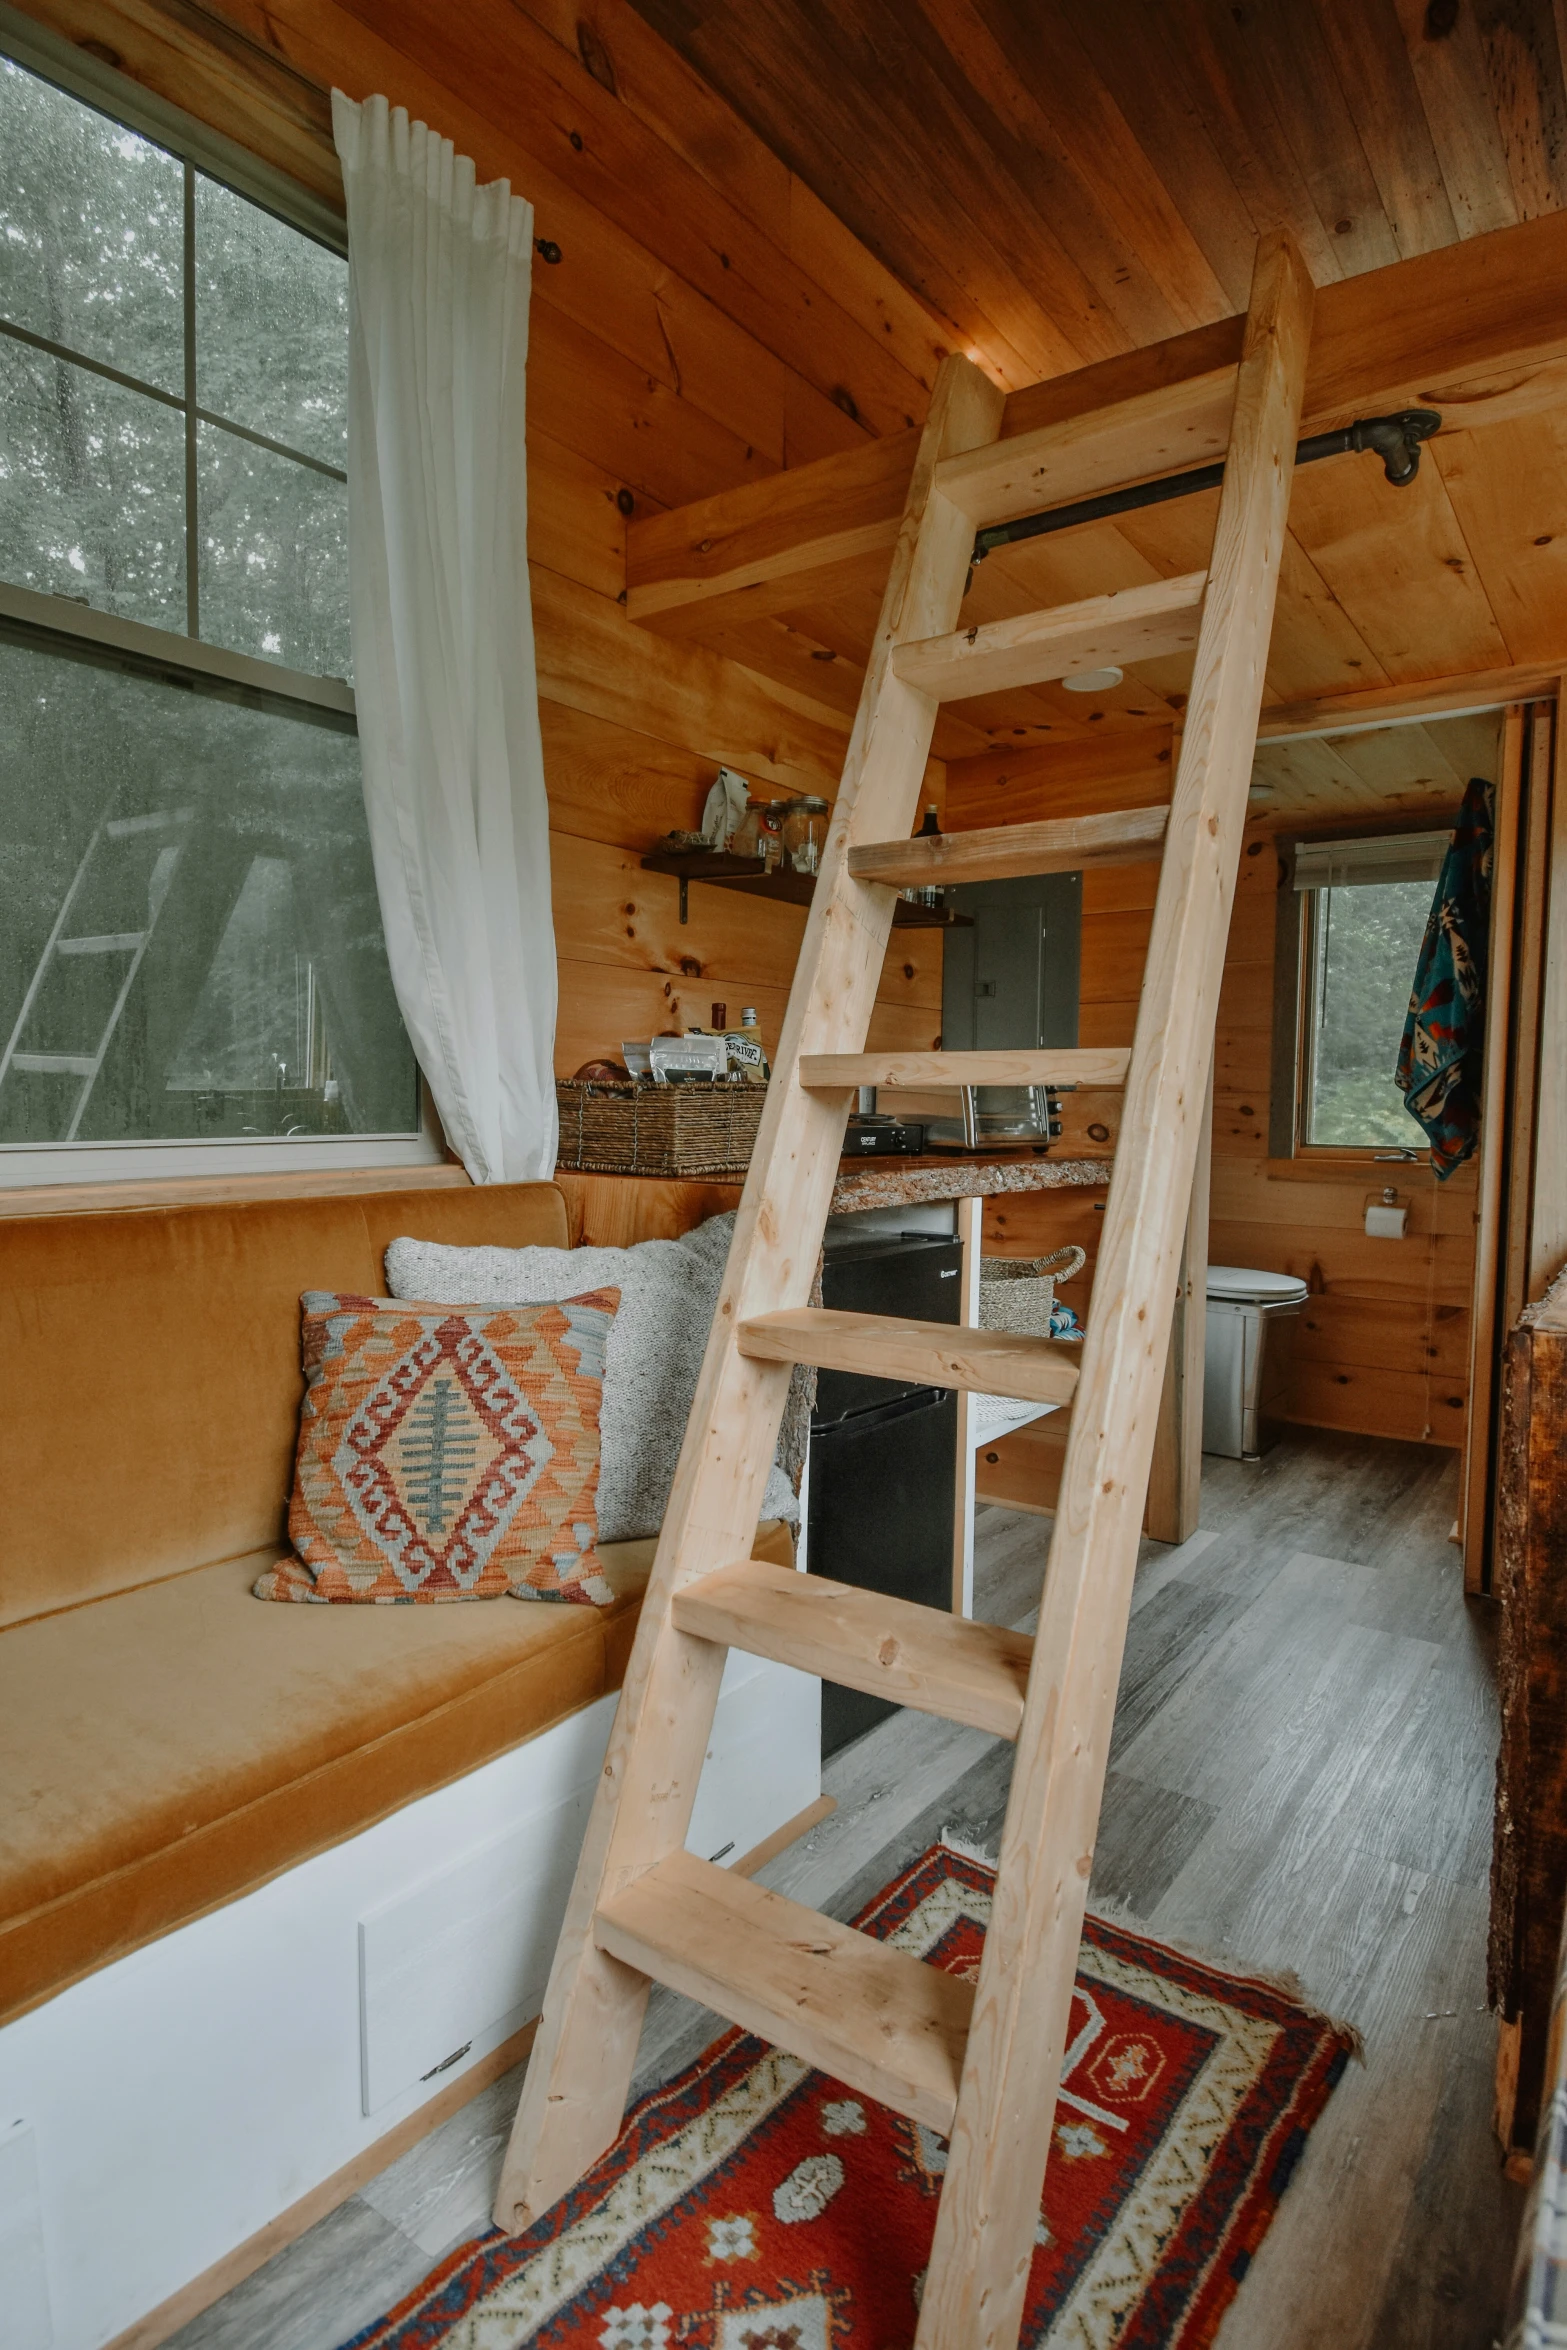 a ladder is built into the wall in the cabin